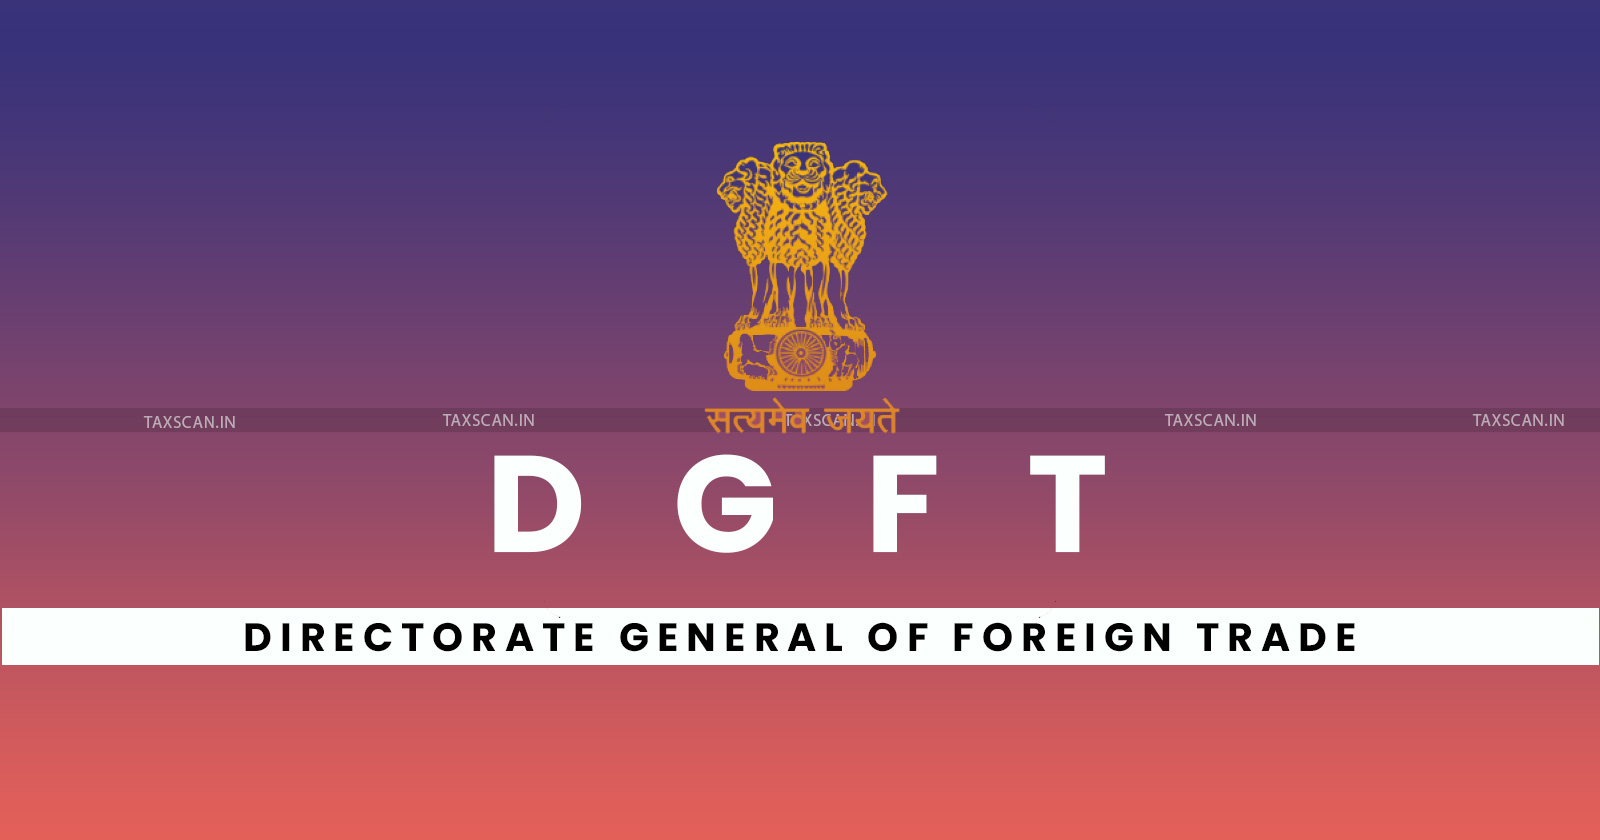 DGFT - Indian Trade Classification - Trade regulations - Export policy - Foreign Trade - taxscan